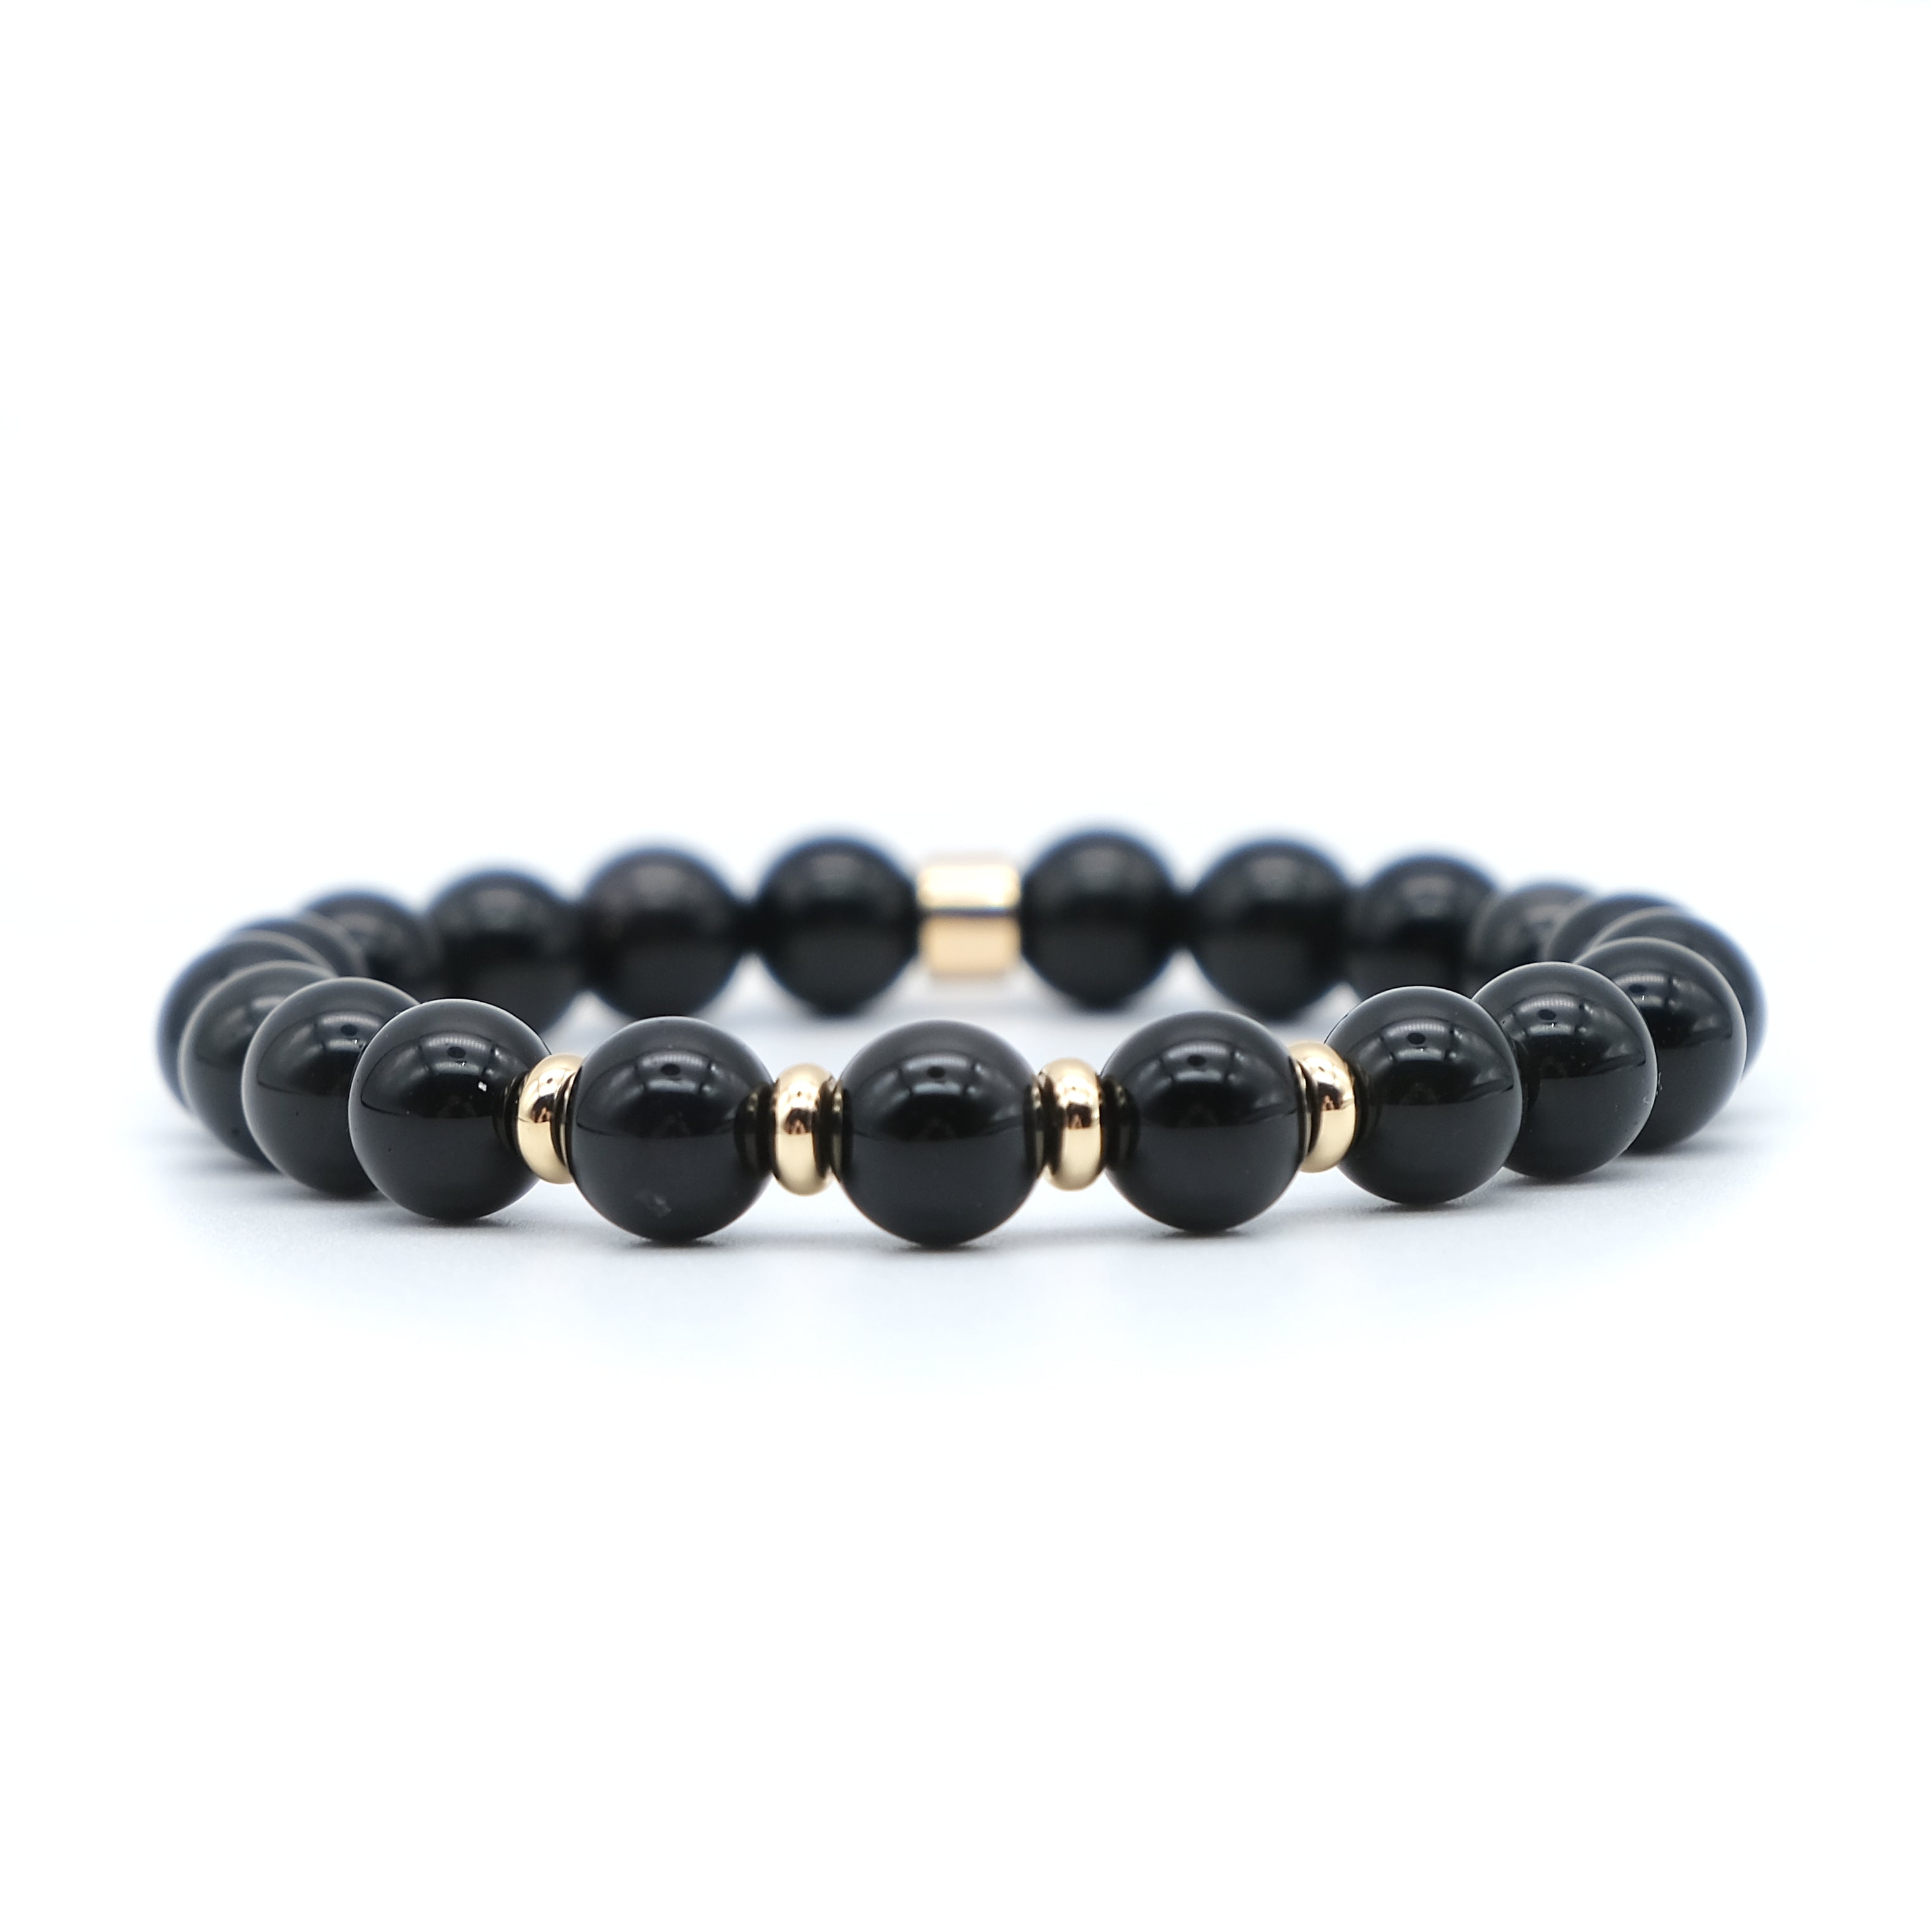 Black Obsidian Gemstone Bracelet with 18ct gold plated accessories 